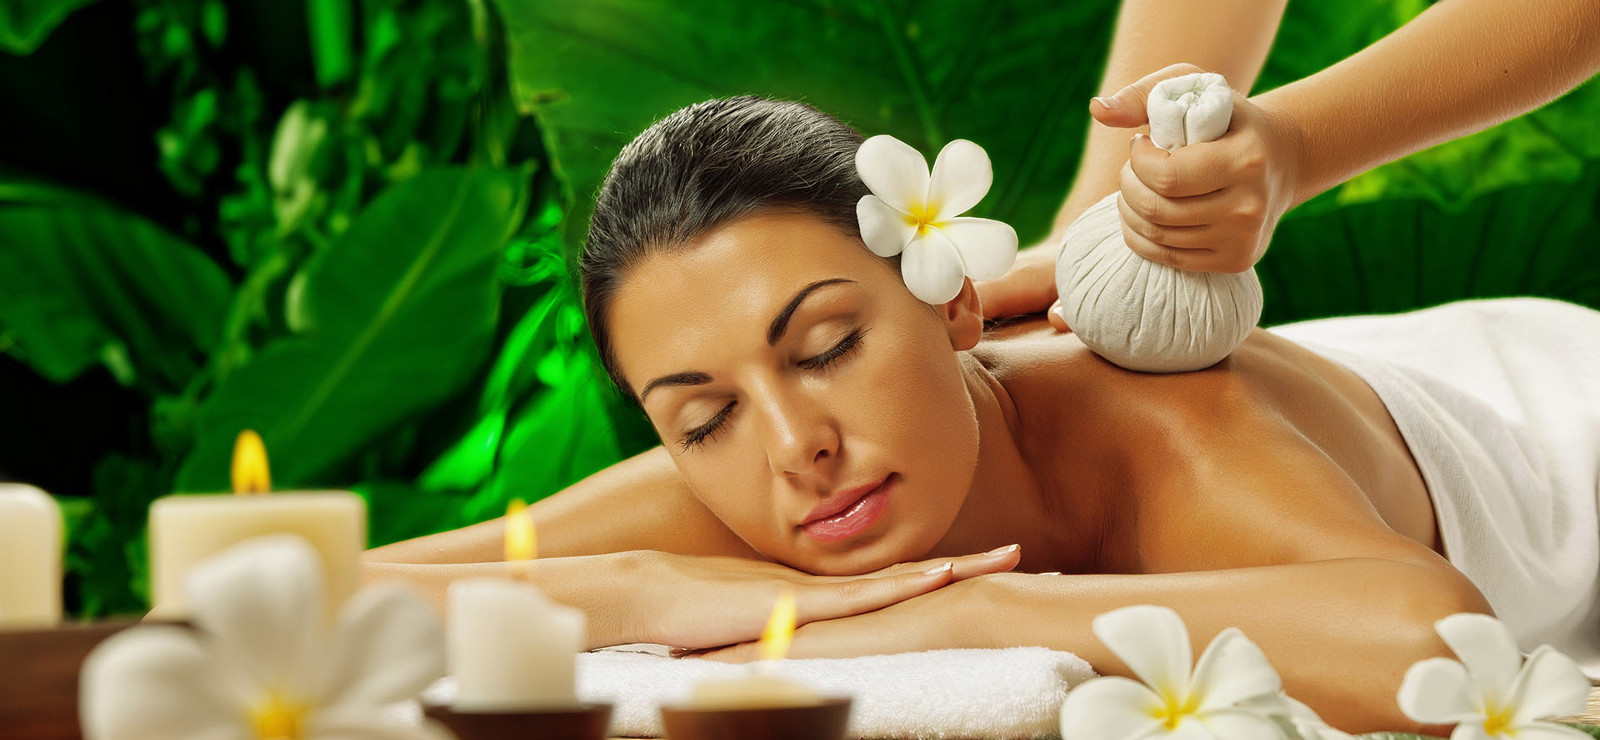 Best Naturopathy Centres in India | WorldWide